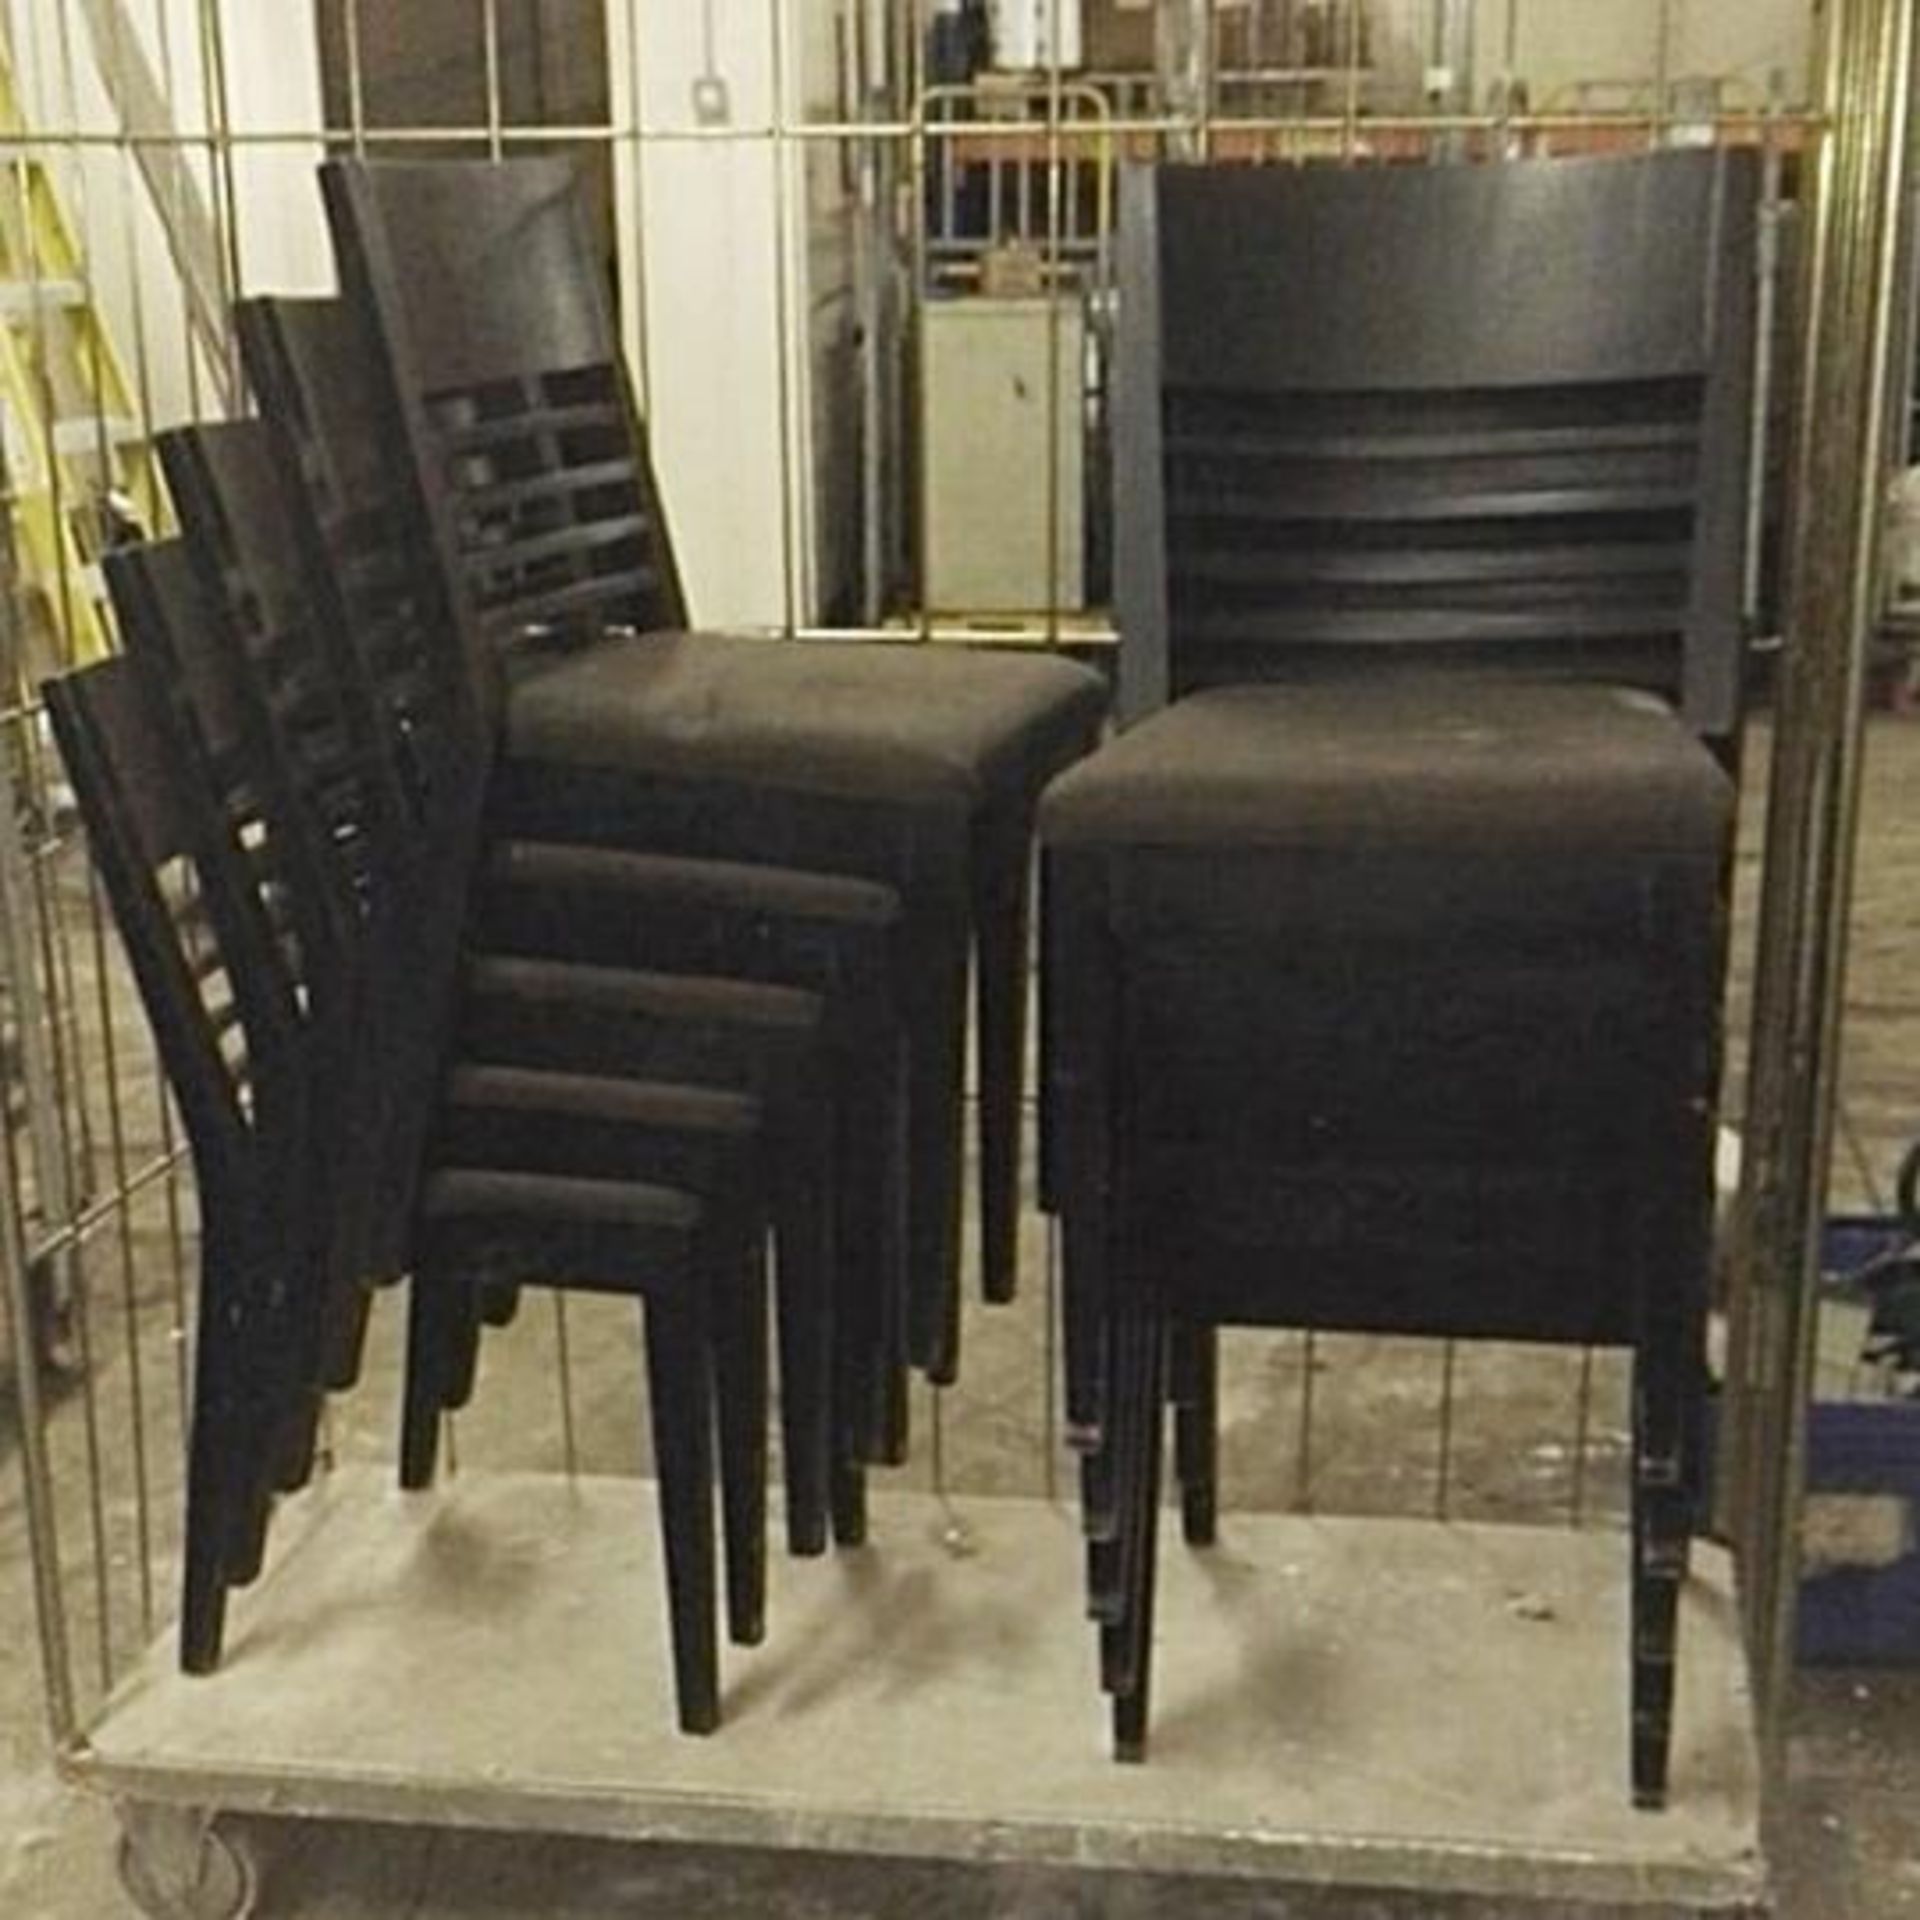 10 x Bistro Chairs In Black- Dimensions: W45 x D43 x H84cm / Seat Height 47cm - CL011 - Image 4 of 4